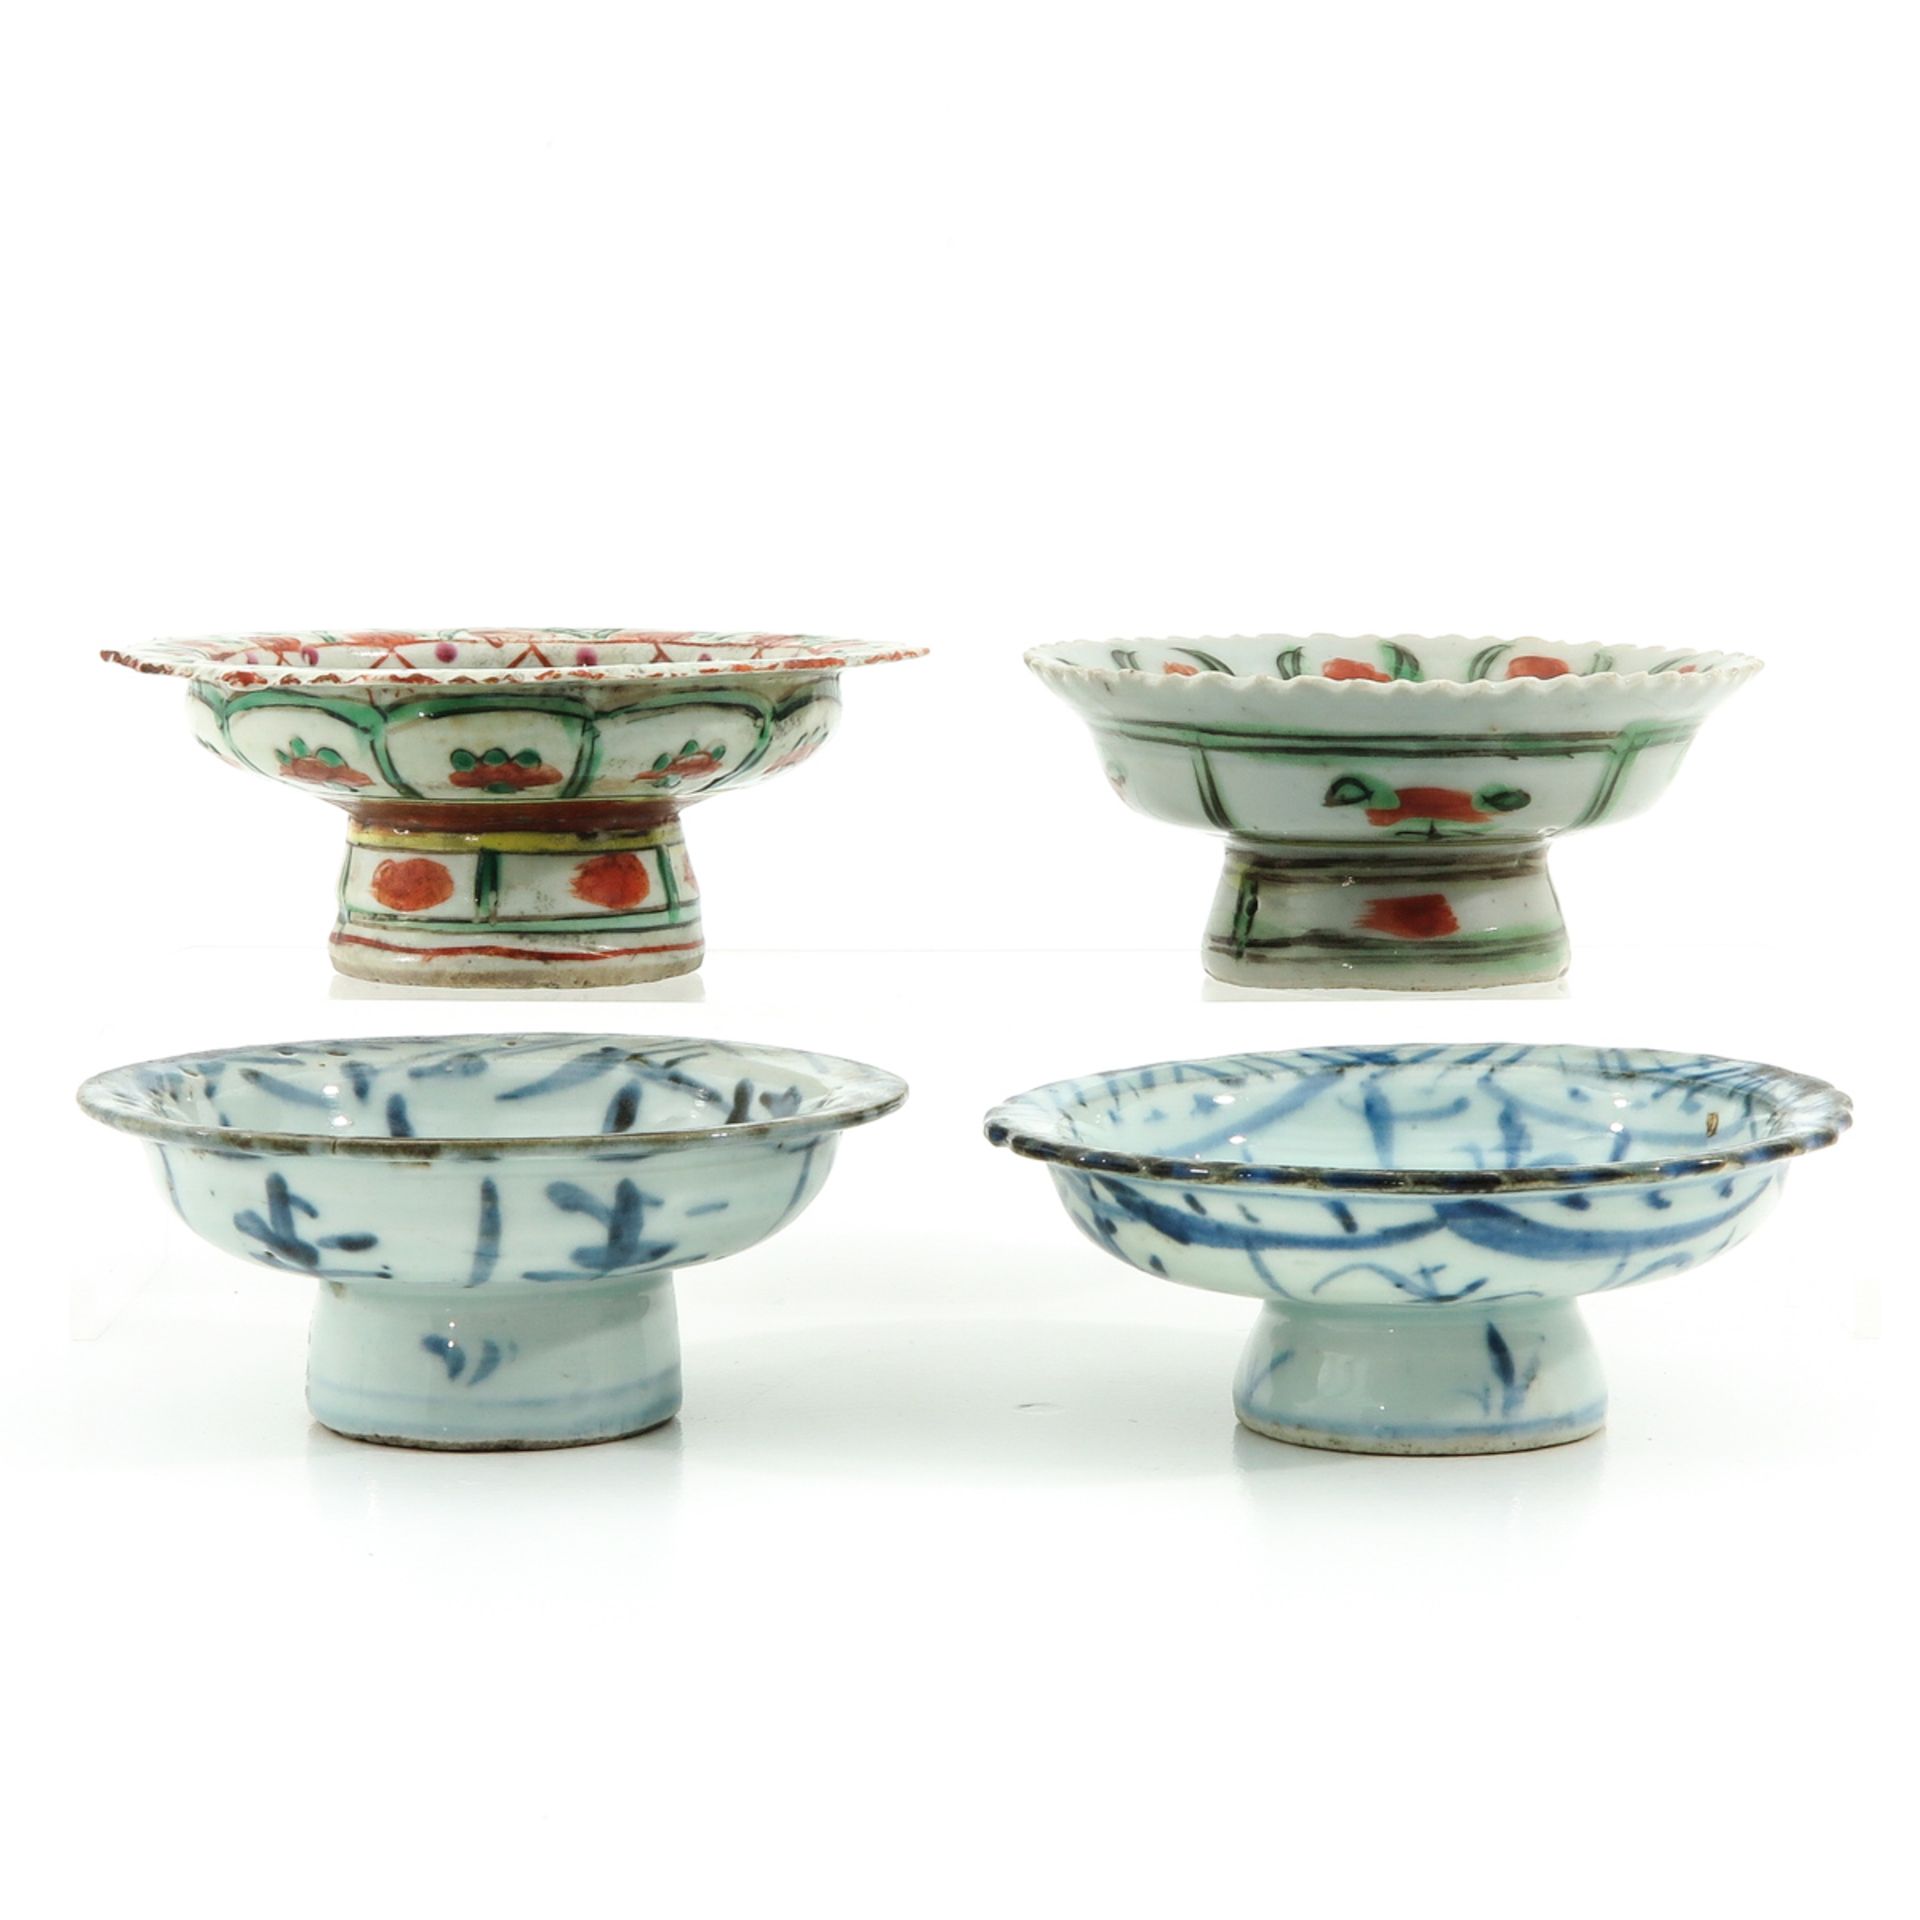 A Collection of 4 Stemmed Bowls